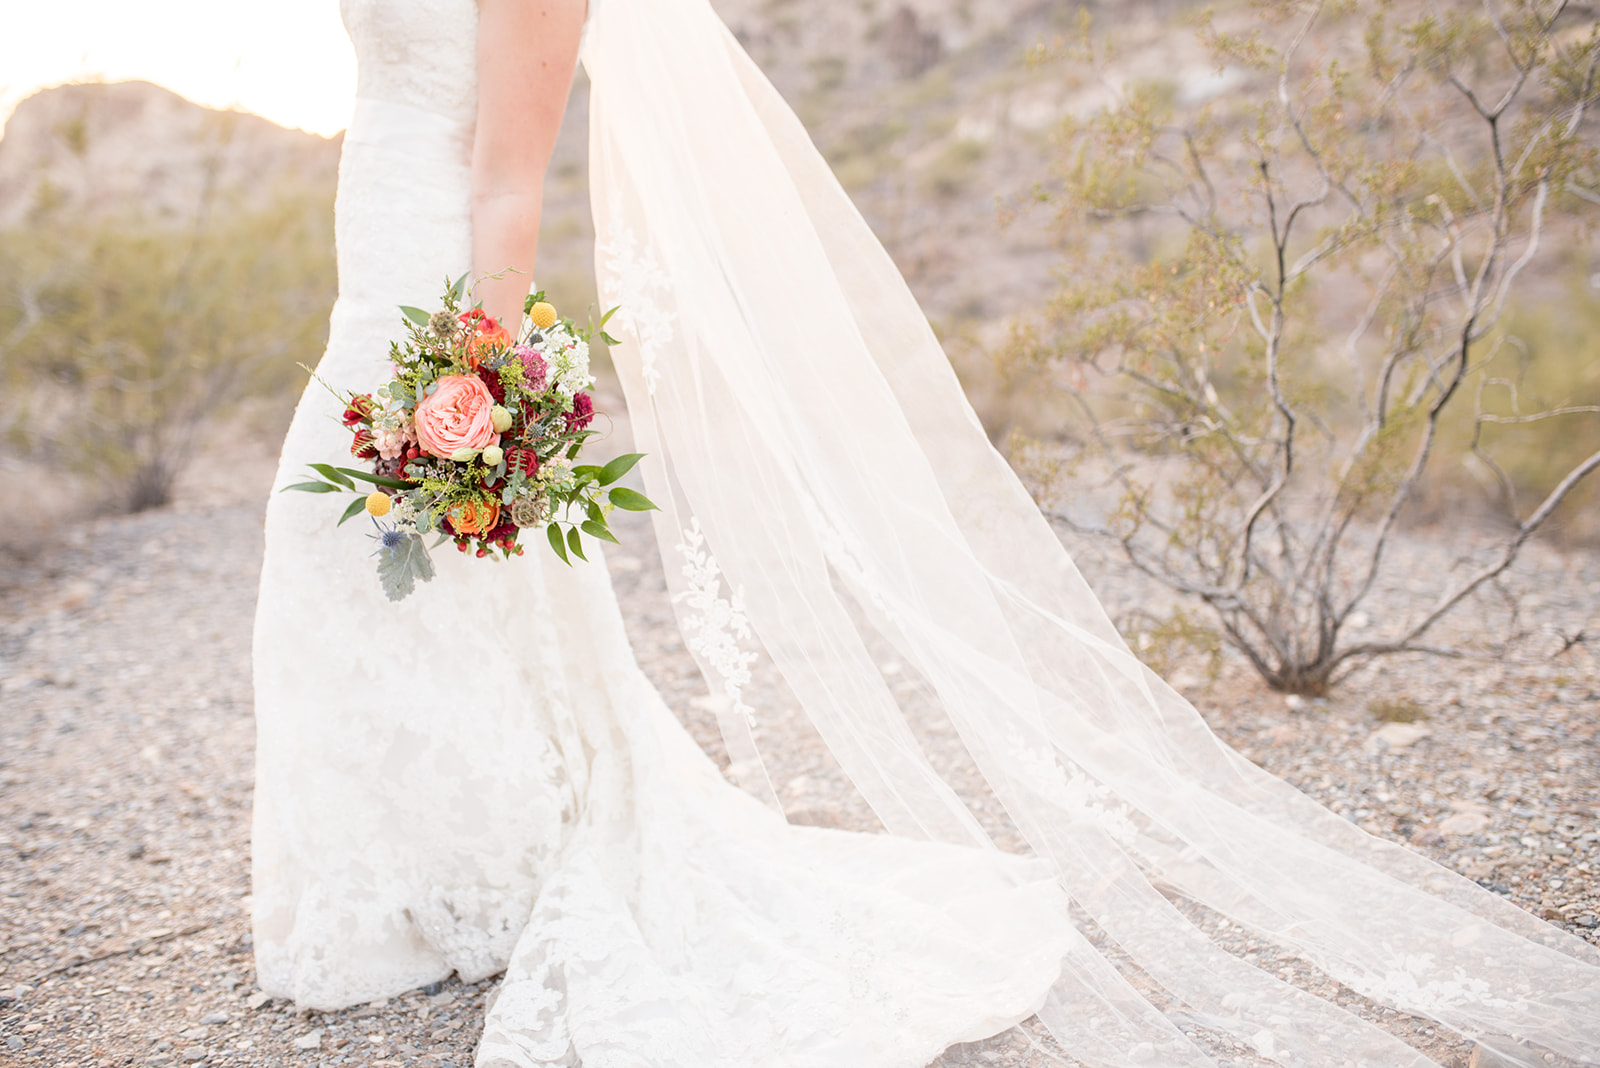 Details of a brides train flowing as she holds her colorful bouquet before a Four Seasons Scottsdale Wedding